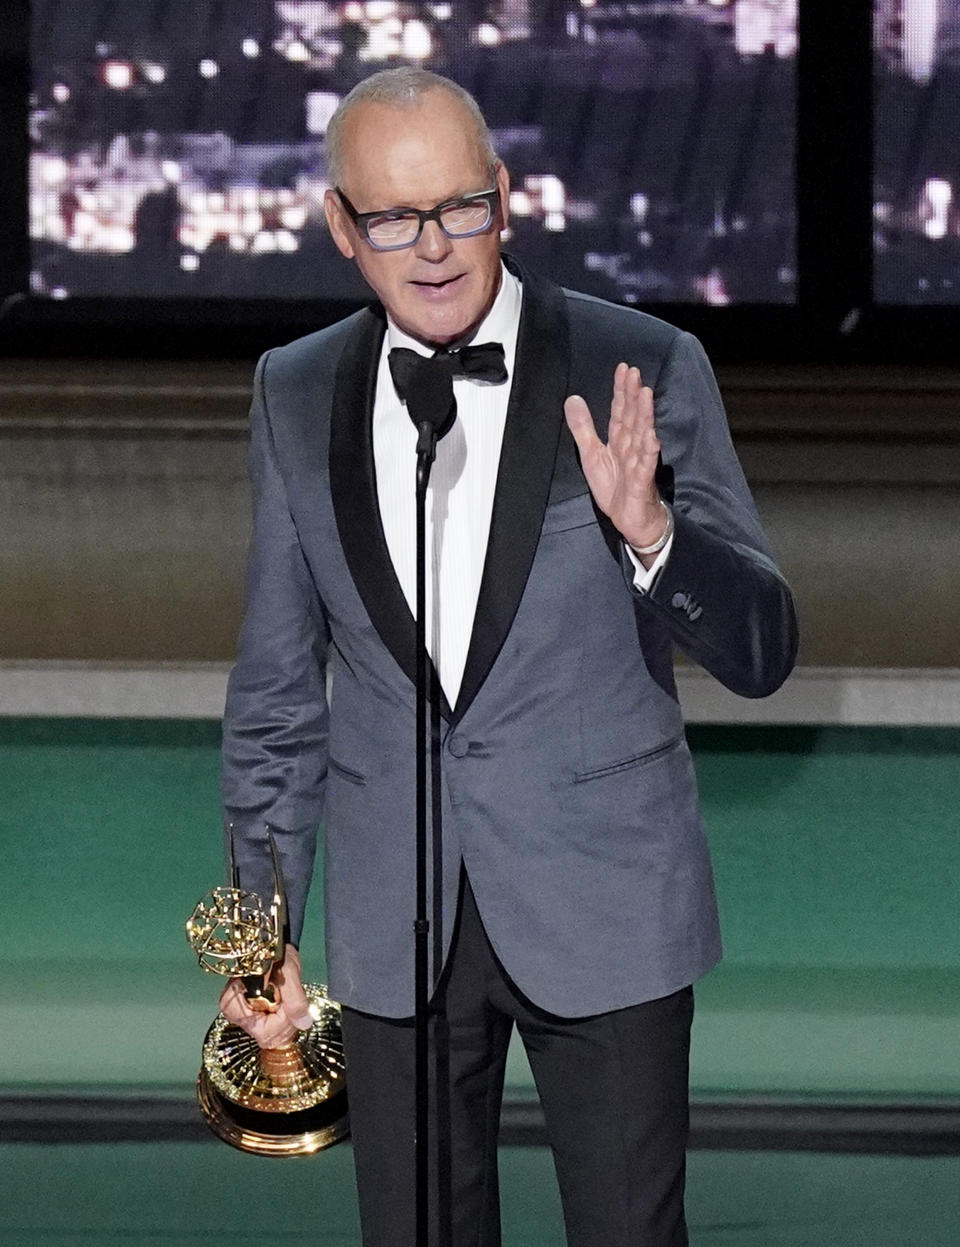 Michael Keaton accepts the Emmy for outstanding lead actor in a limited or anthology series or movie for "Dopesick" at the 74th Primetime Emmy Awards on Monday, Sept. 12, 2022, at the Microsoft Theater in Los Angeles. (AP Photo/Mark Terrill)